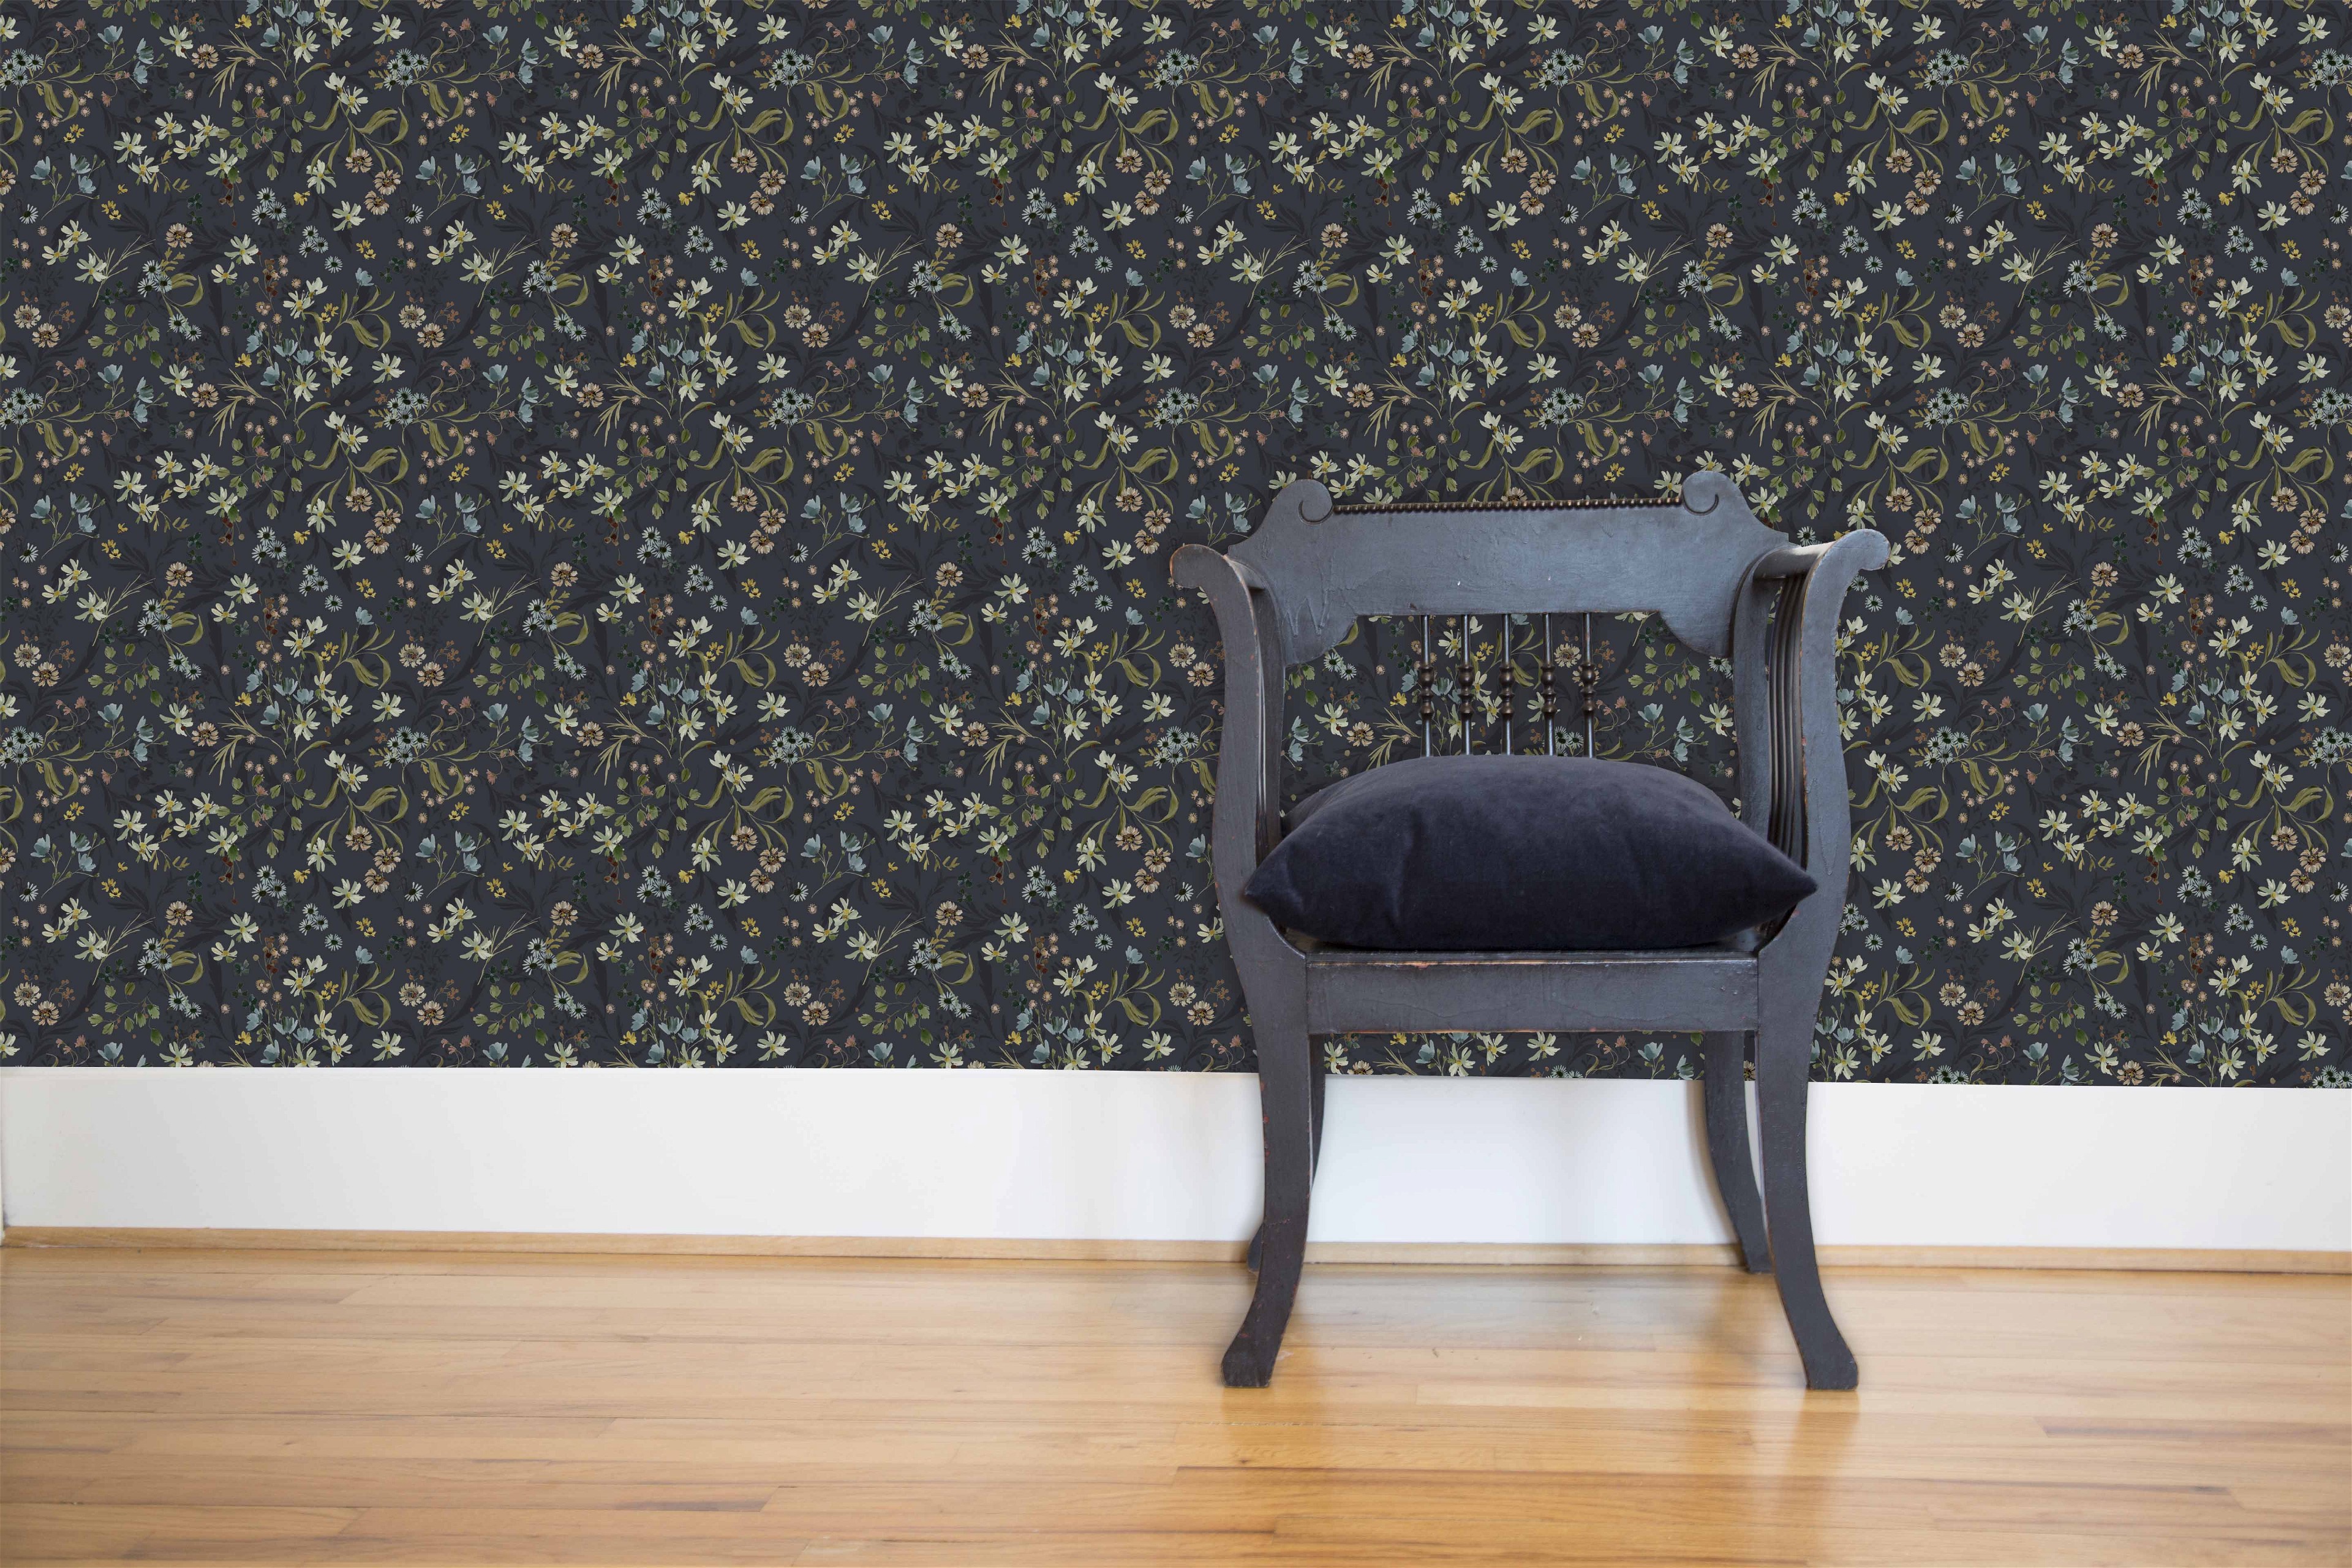 a chair sitting in front of a floral wallpaper